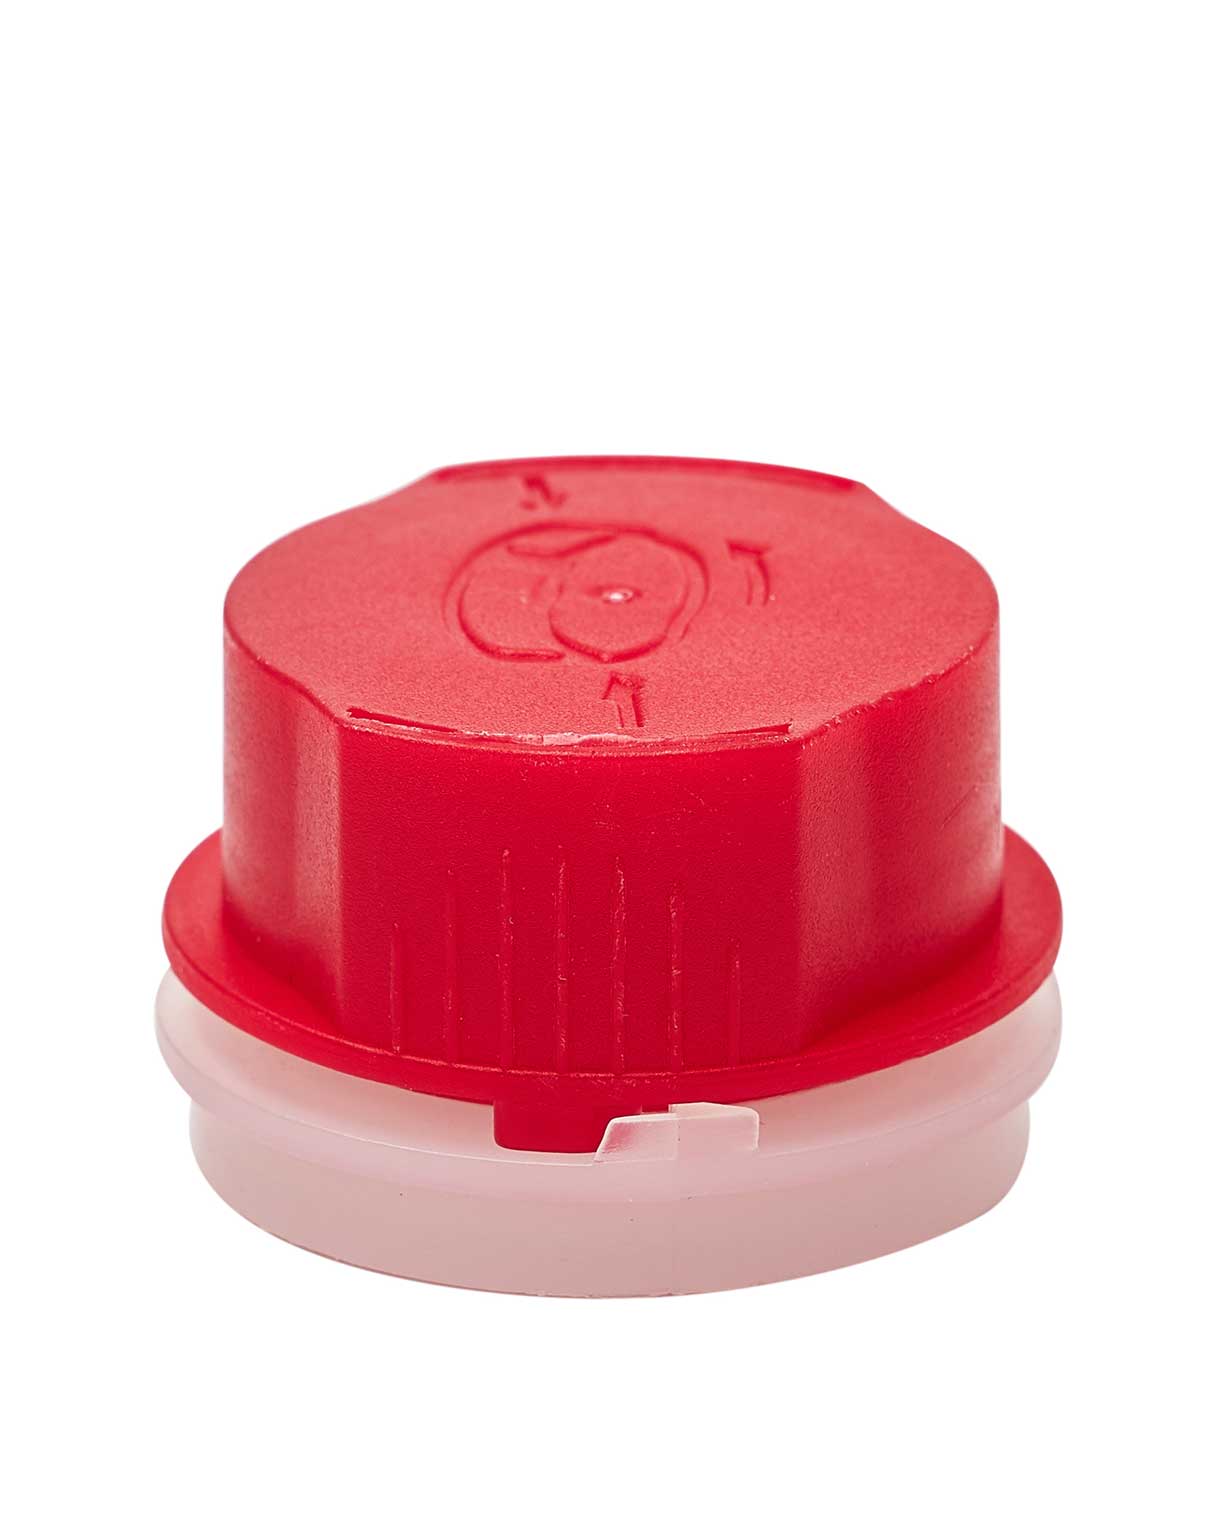 42mm rel opening pp red child resistant dispensing closure